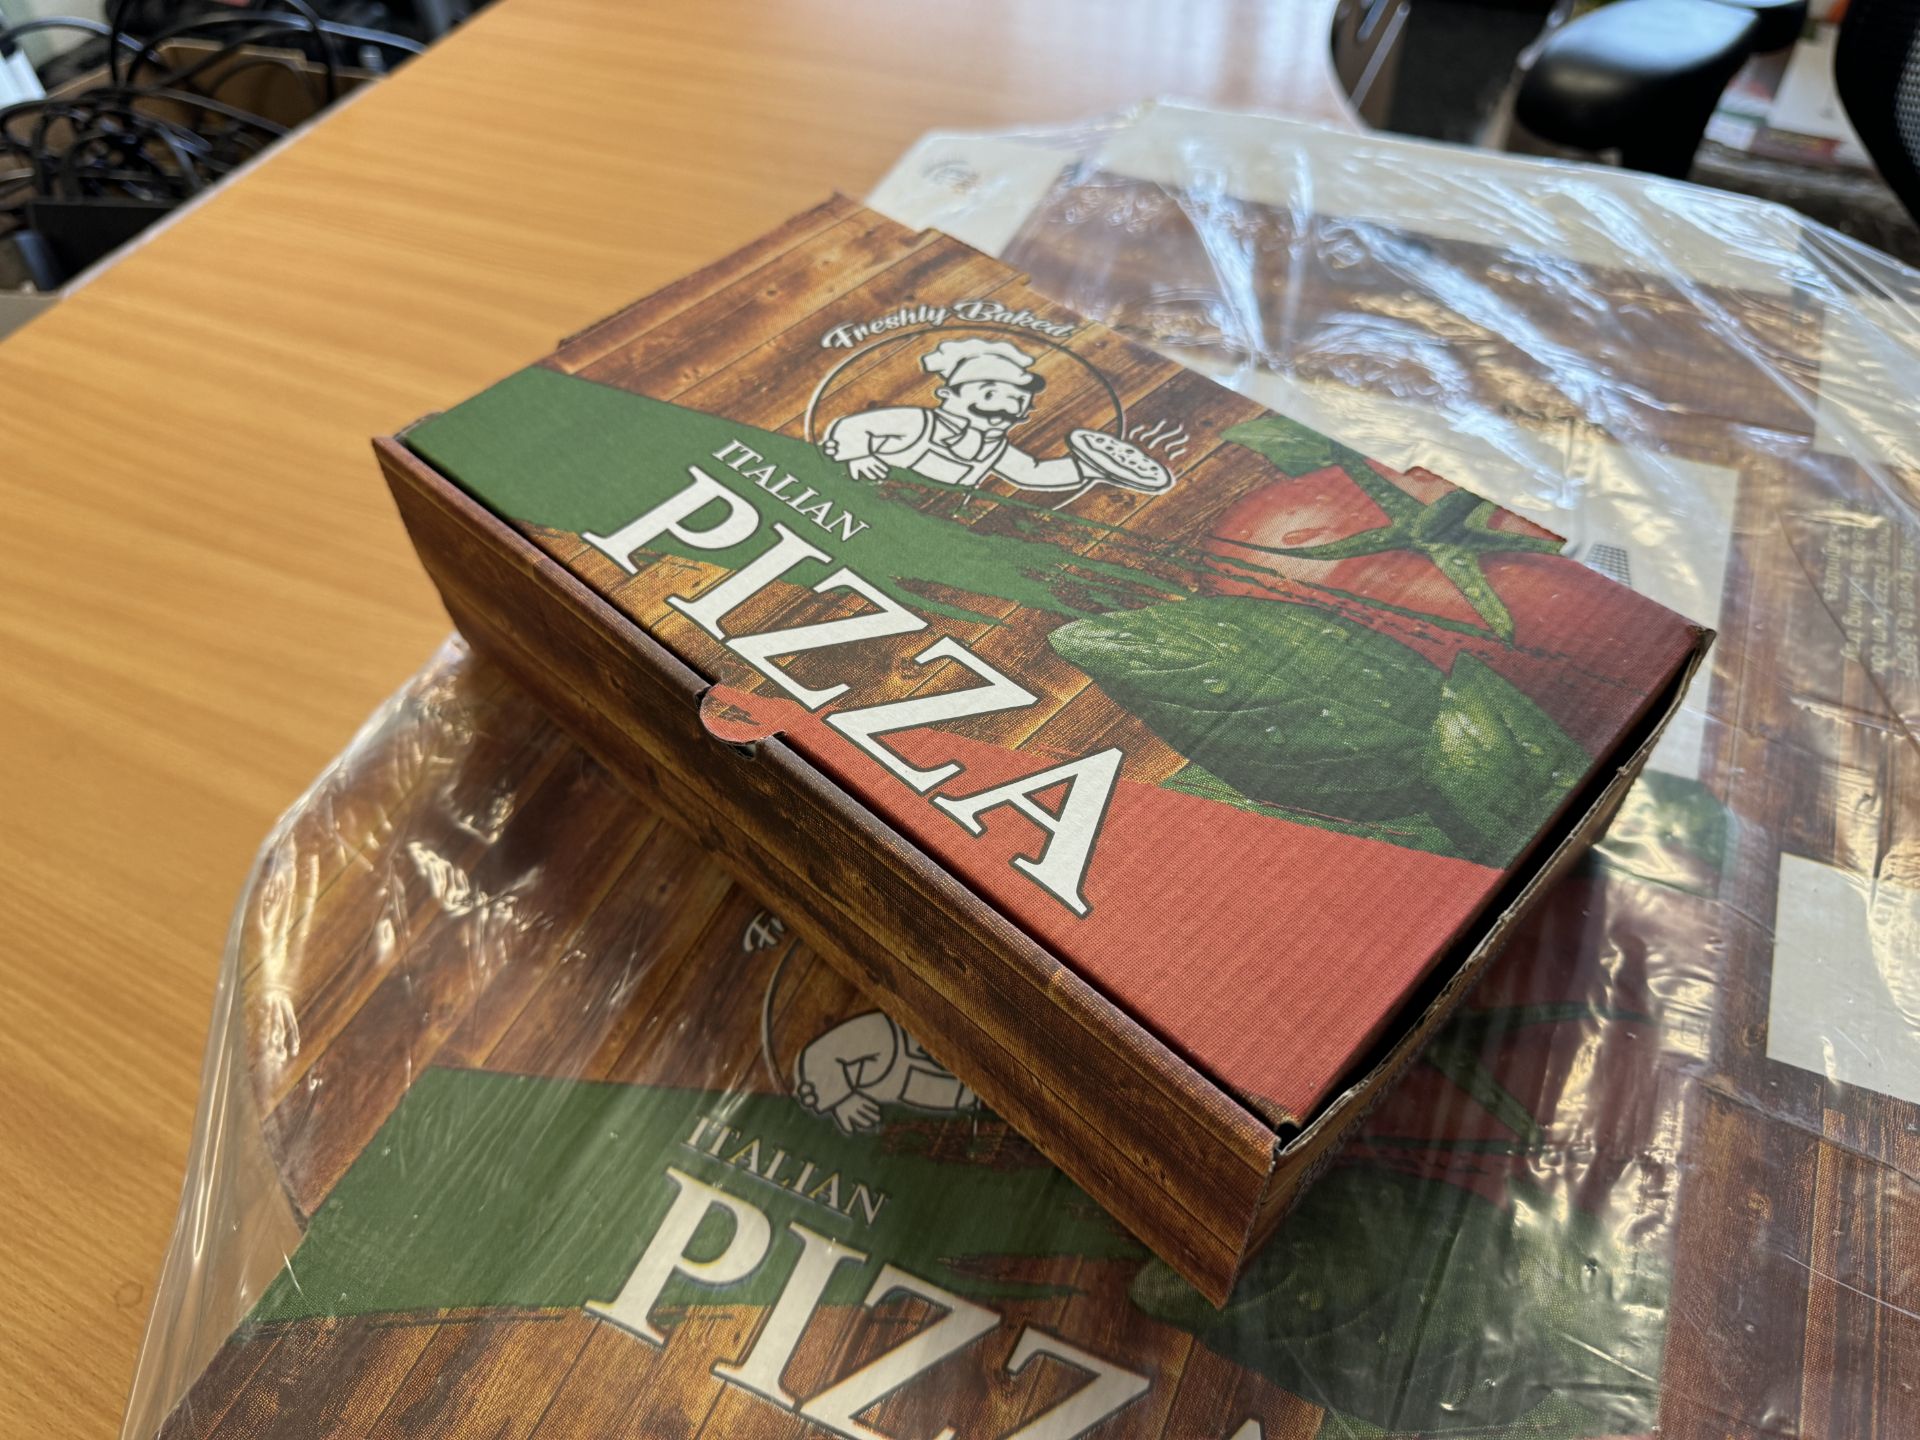 Circa 1260 - Italian Pizza Calzone Boxes (Cardboard) - Multiple Uses RRP £182 - Image 4 of 13